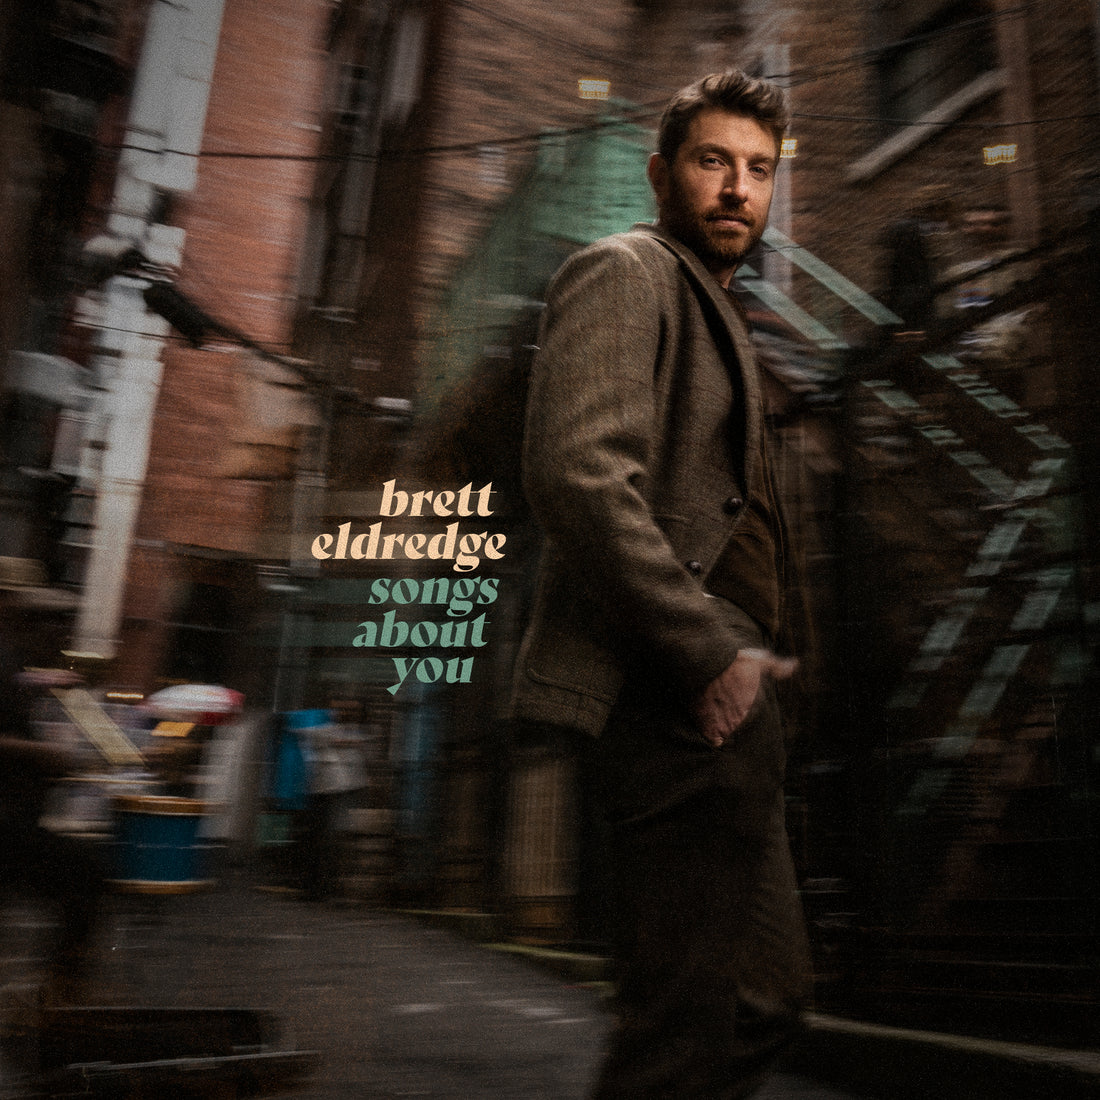 Brett Eldredge Releases New Song “I Feel Fine” From Forthcoming Album, Songs About You, Due 6/17